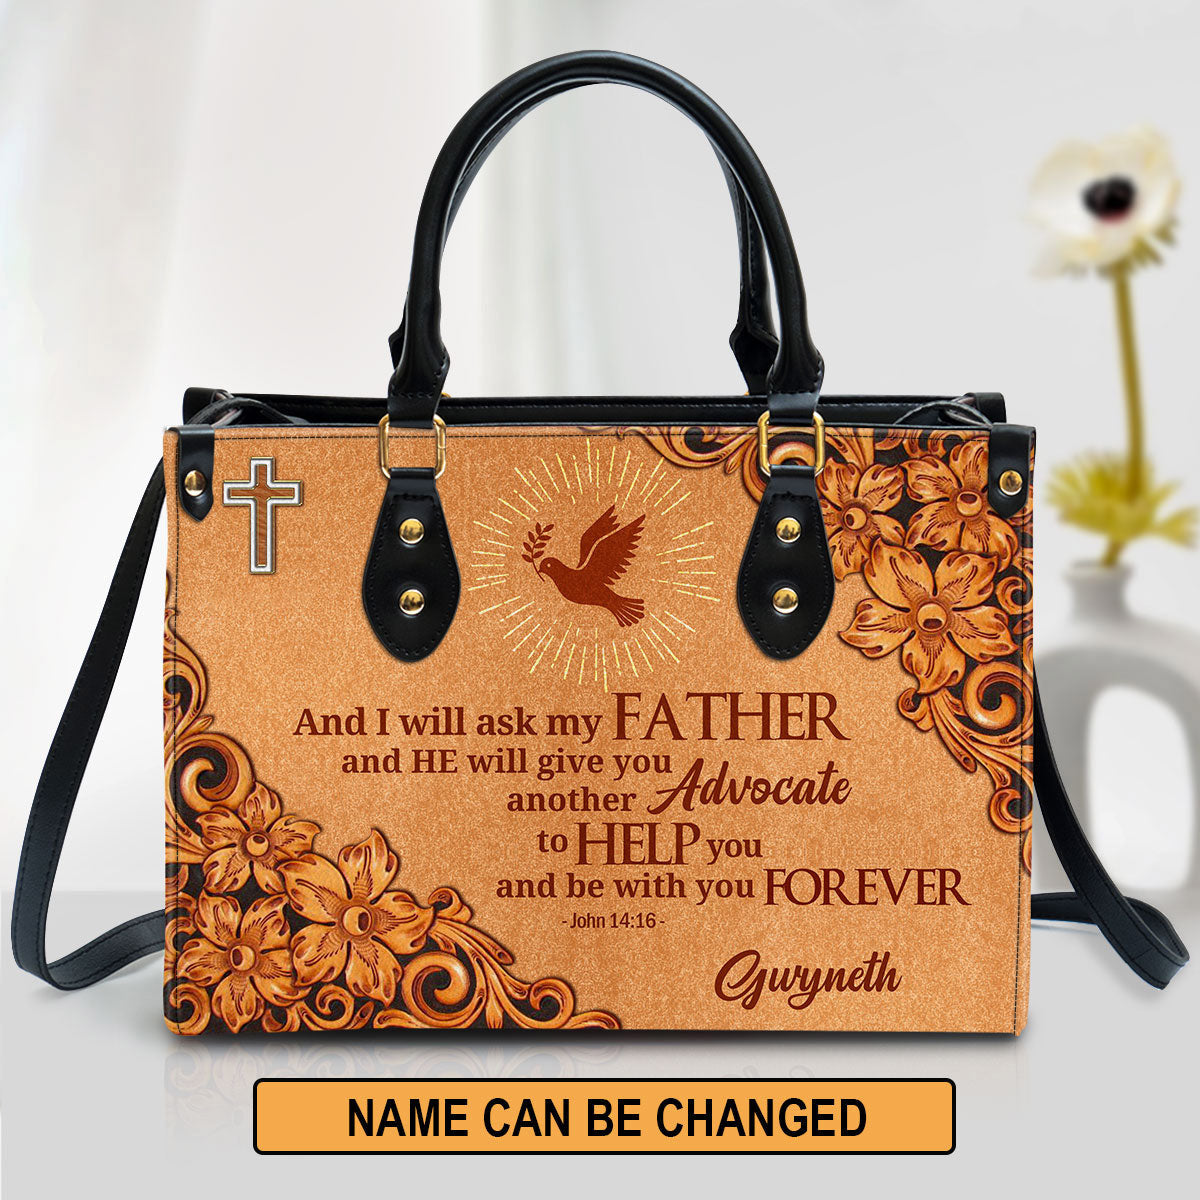 Cross And Pigeon And I Will Ask The Father John 1416 Personalized Zippered Leather Handbag With Handle Christian Gifts For Women